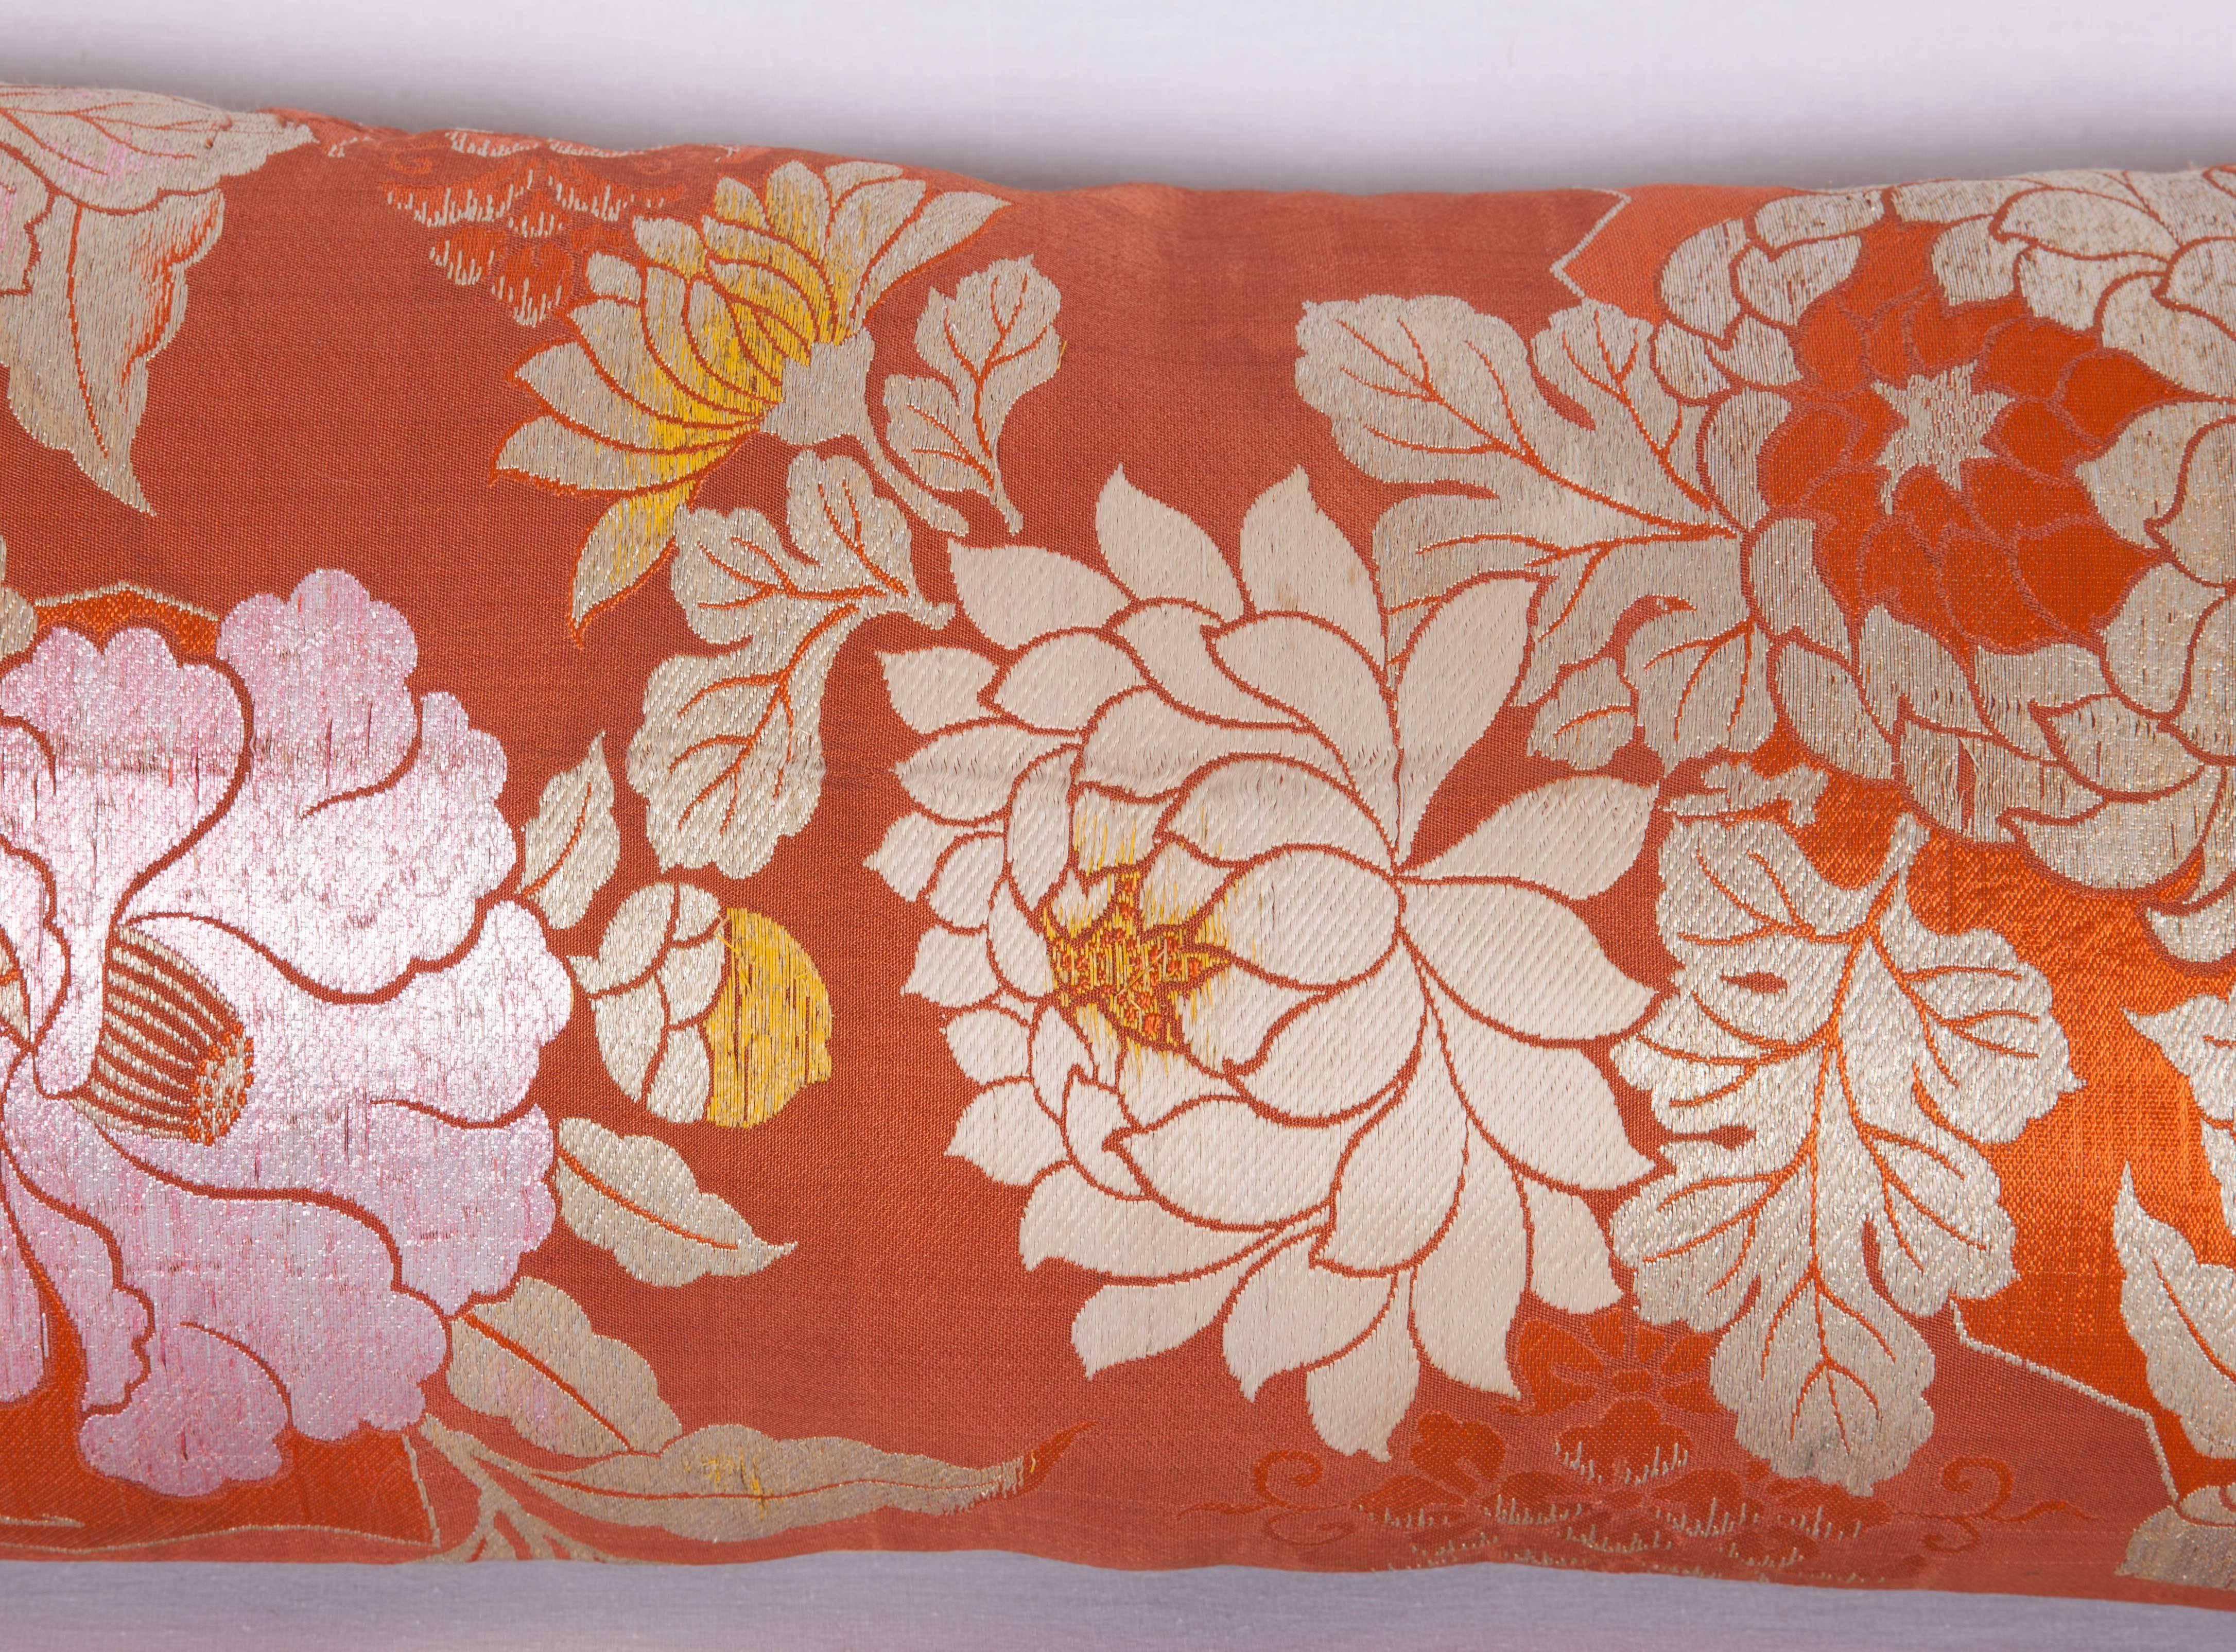 The pillow is made out of mid-20th century, Japanese silk obi. It does not come with an insert but it comes with a bag made to the size and out of cotton to accommodate the filling. The backing is made of linen. Please note ' filling is not